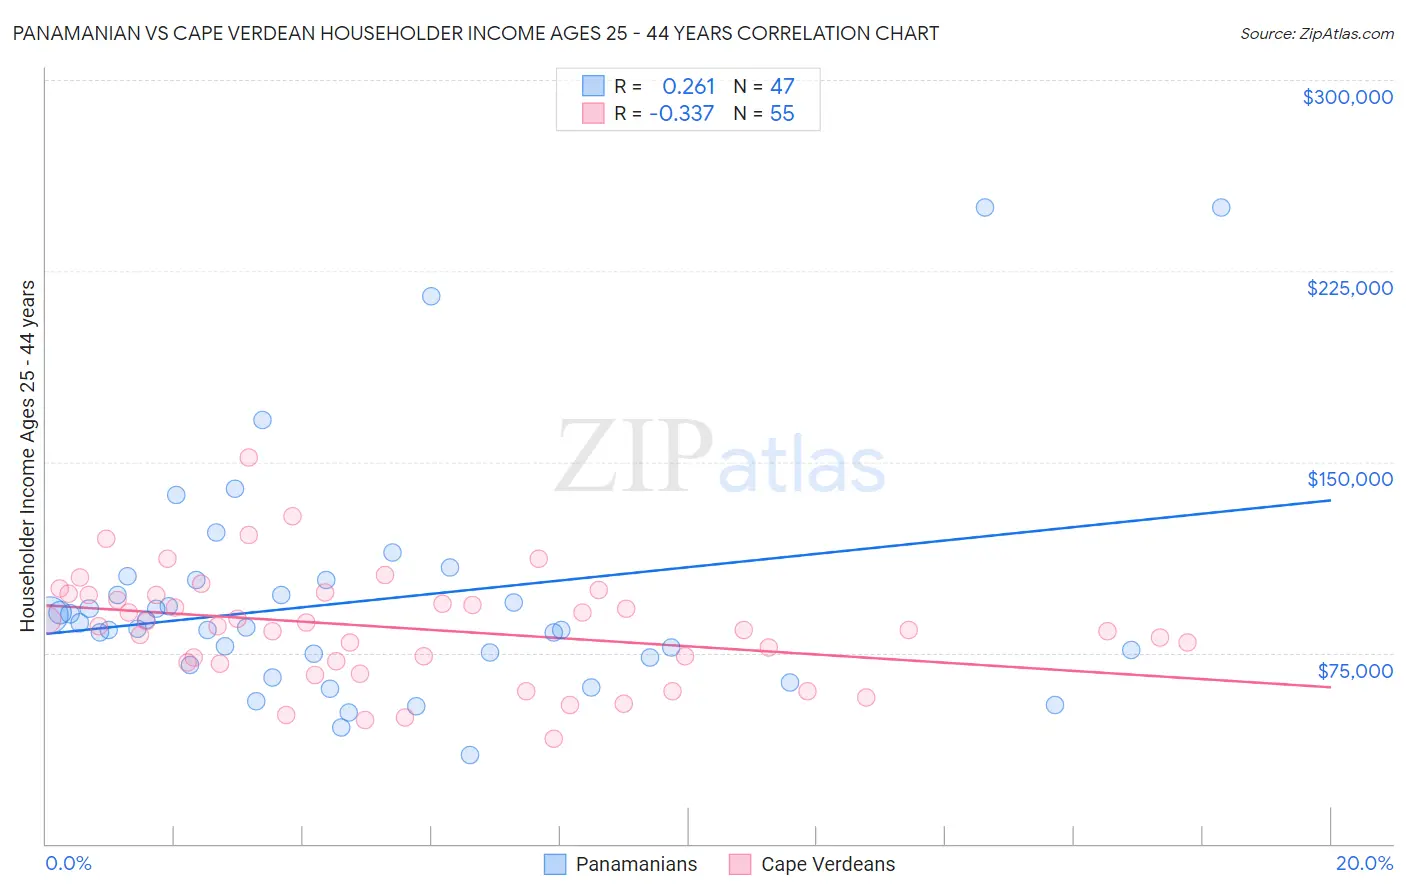 Panamanian vs Cape Verdean Householder Income Ages 25 - 44 years